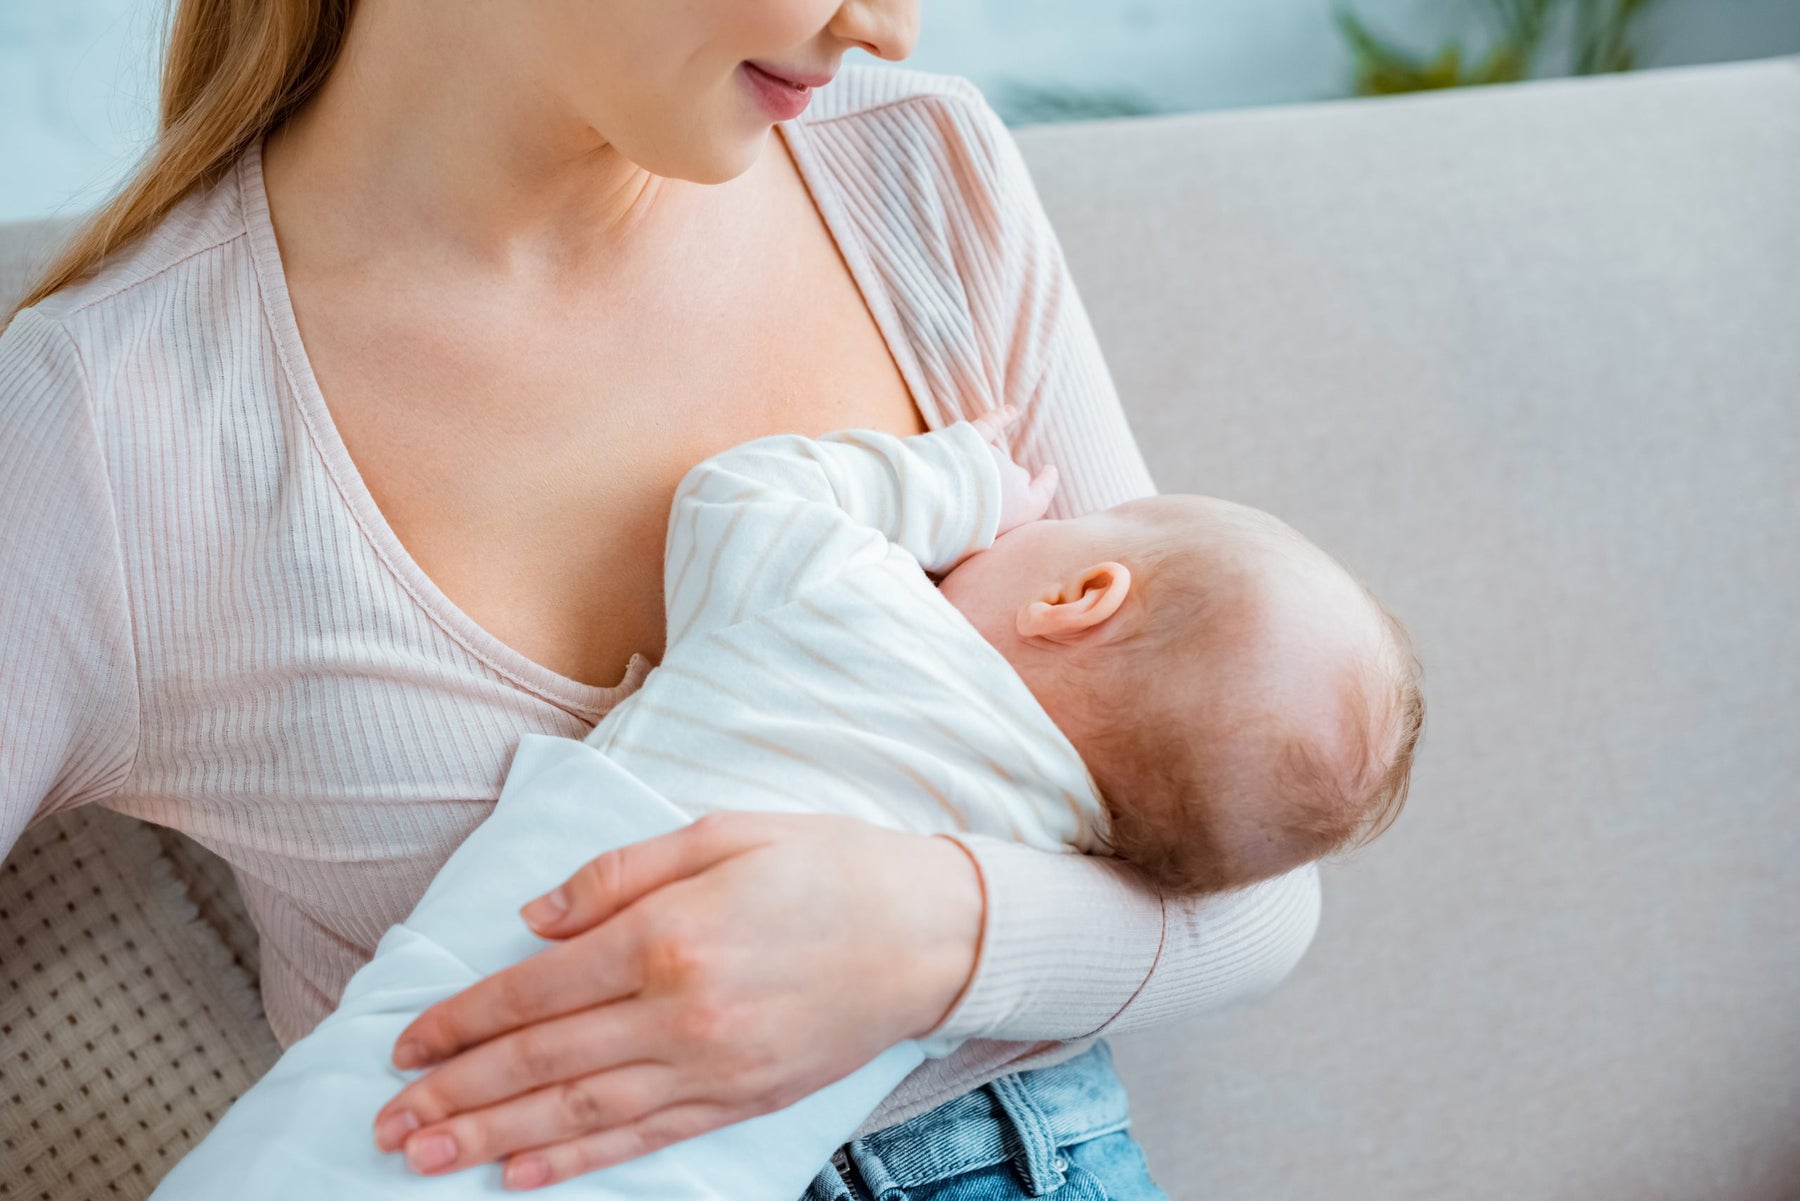 10 Awesome Facts About Breastfeeding You Didn't Know